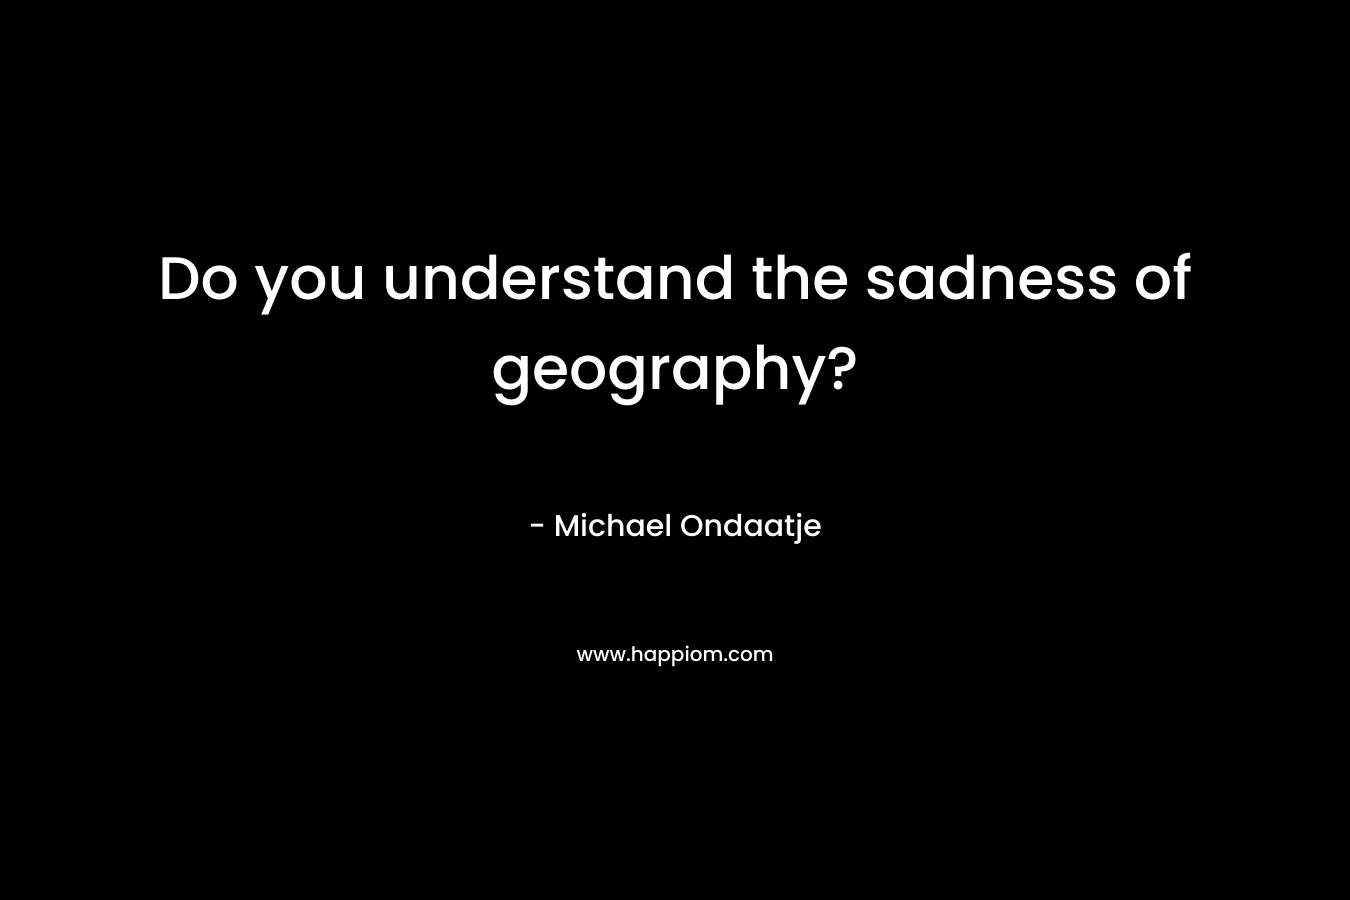 Do you understand the sadness of geography?